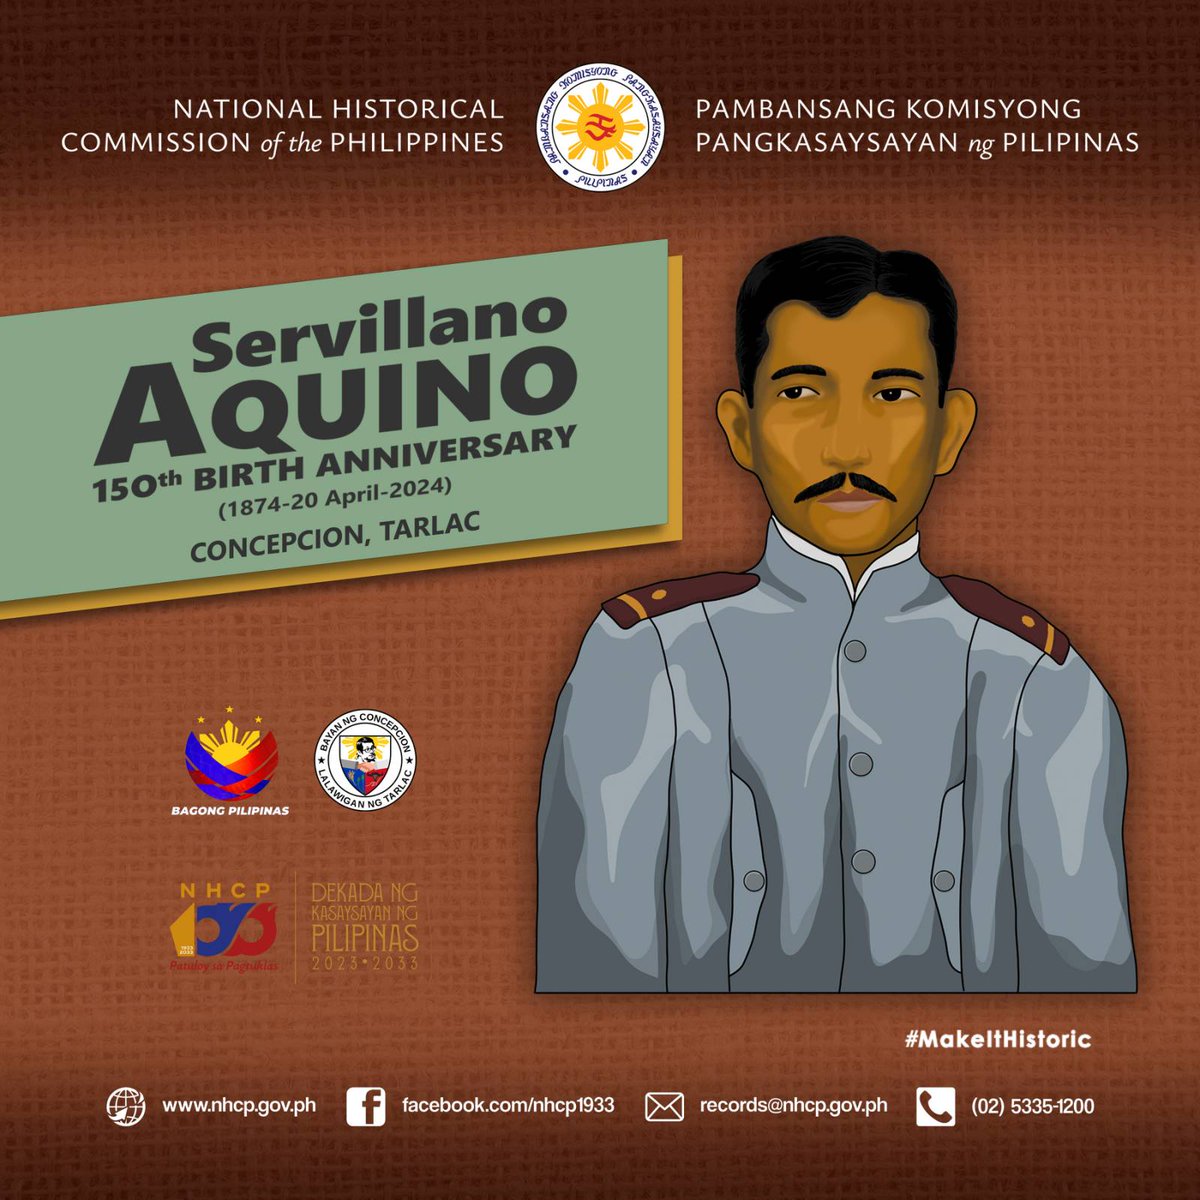 The NHCP with the Province of Tarlac and Municipality of Concepcion join the nation in remembering General Servillano Aquino on his 150th Birth Anniversary.

Aquino was a key leader of the Revolution in Central Luzon from 1896 to 1902.

#MakeItHistoric
#ServillanoAquino150